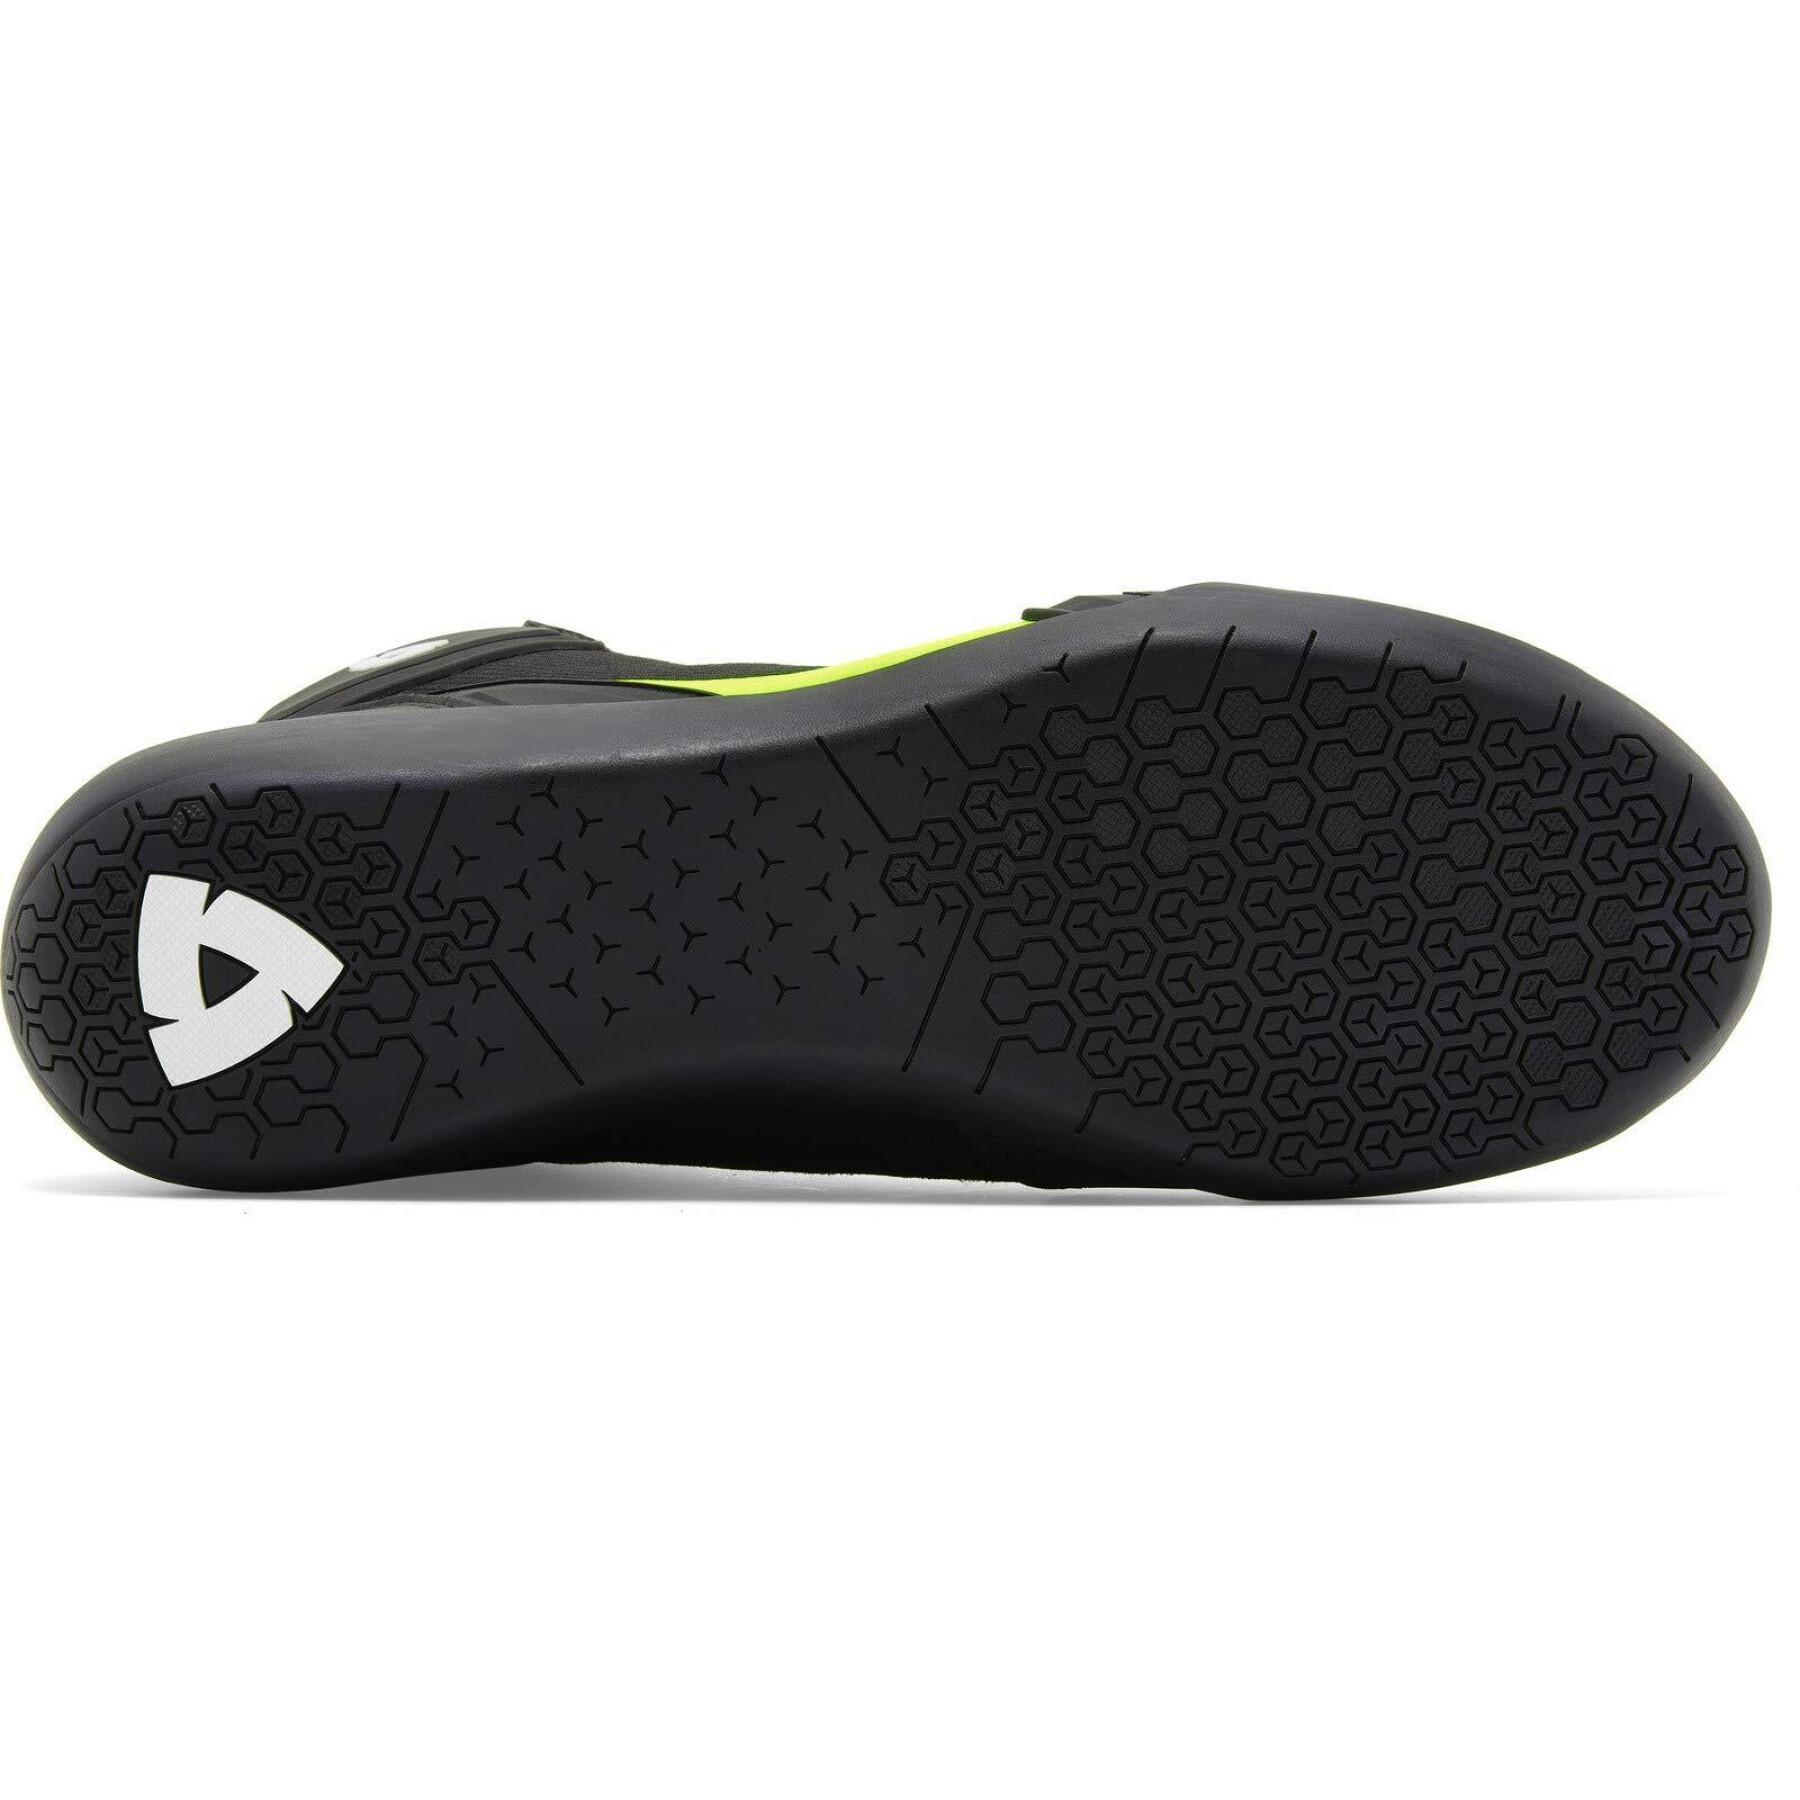 Motorcycle shoes Rev'it G-Force H2O